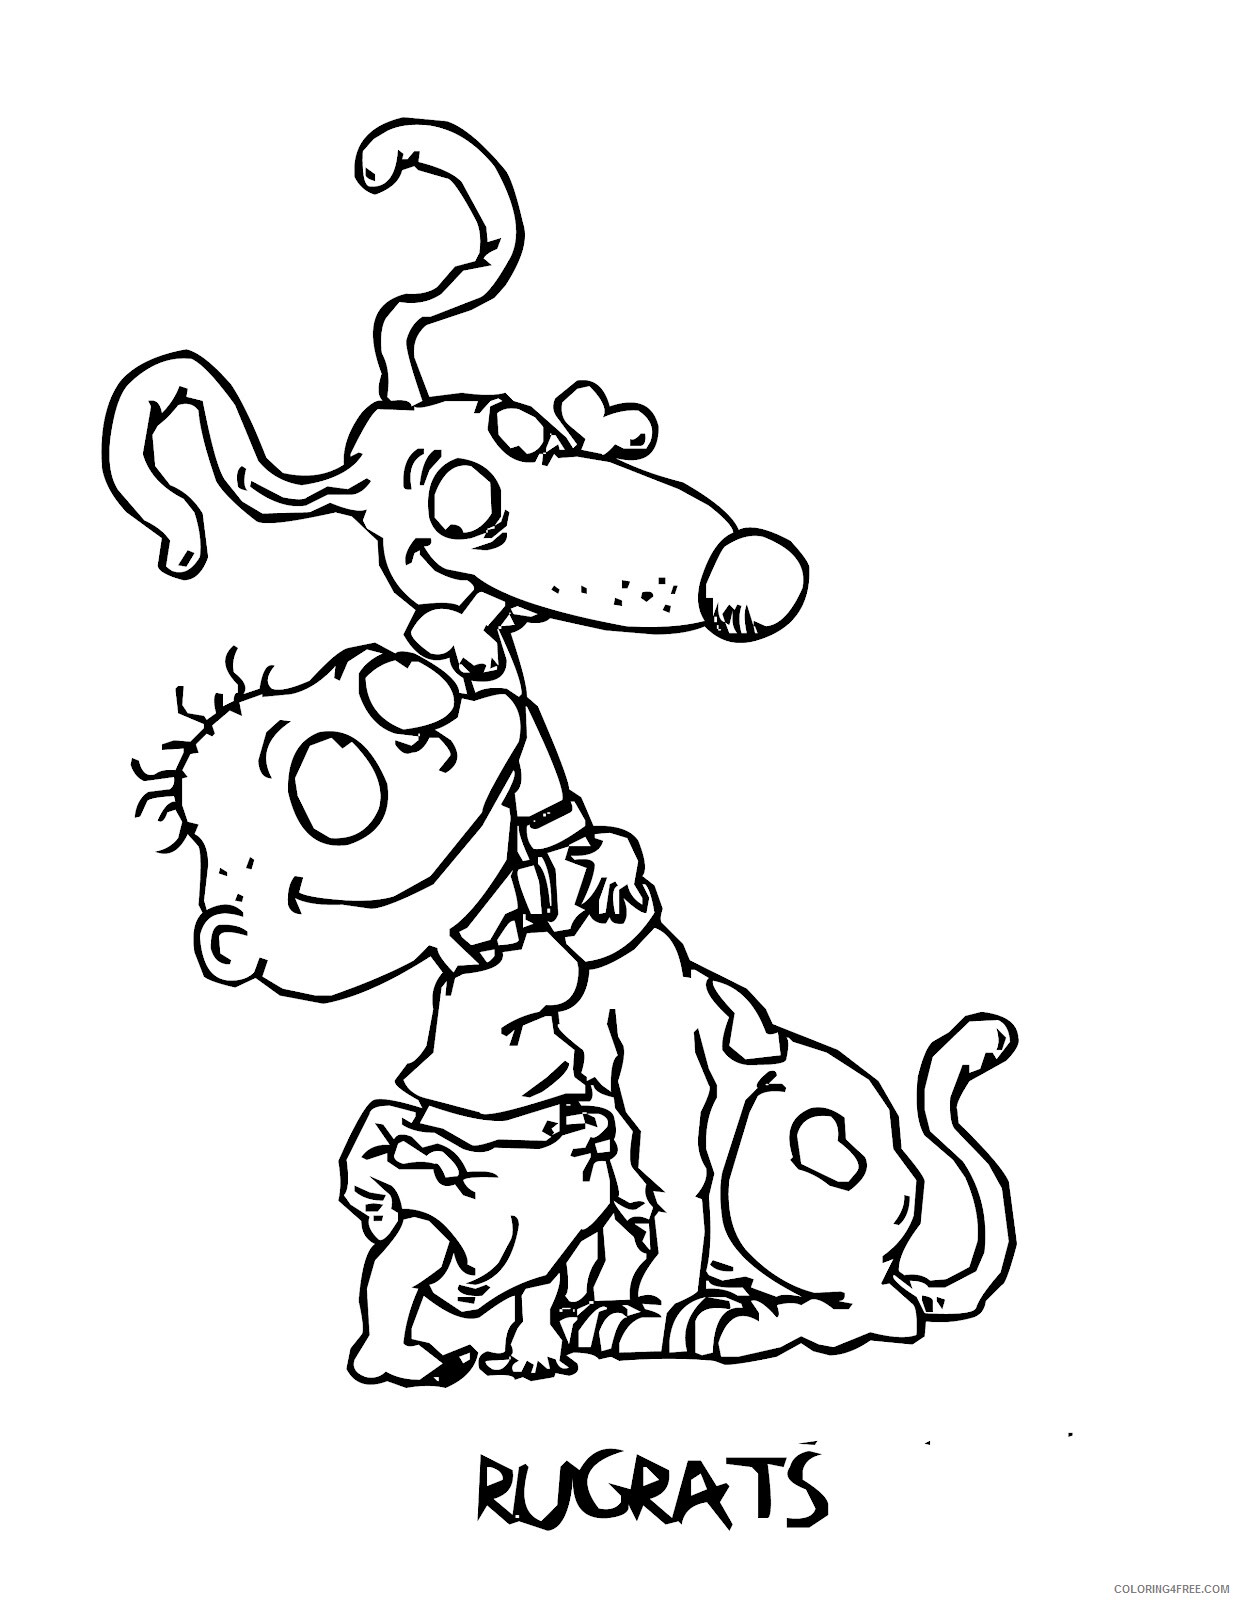 Rugrats Coloring Pages TV Film Rugrats Pictures Printable 2020 07226 Coloring4free